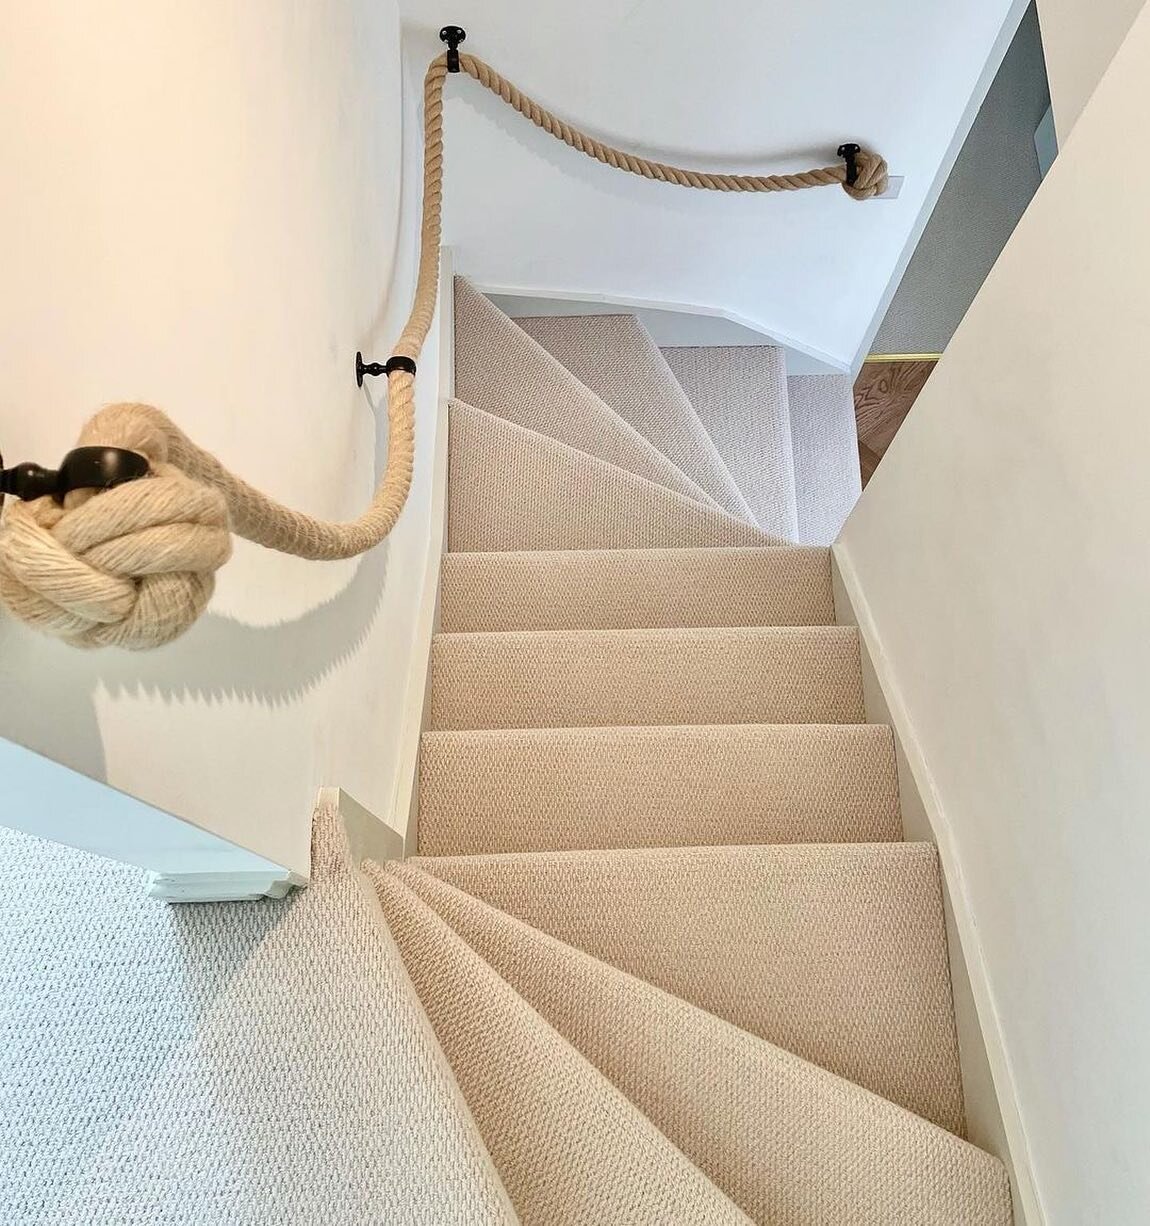 When it comes to decorating, it's easy to forget about the staircase. 

But just because it's a transitional space doesn't mean it can't have style - just look at this recent project by one of our favourite interior designers - @rupert.developments -